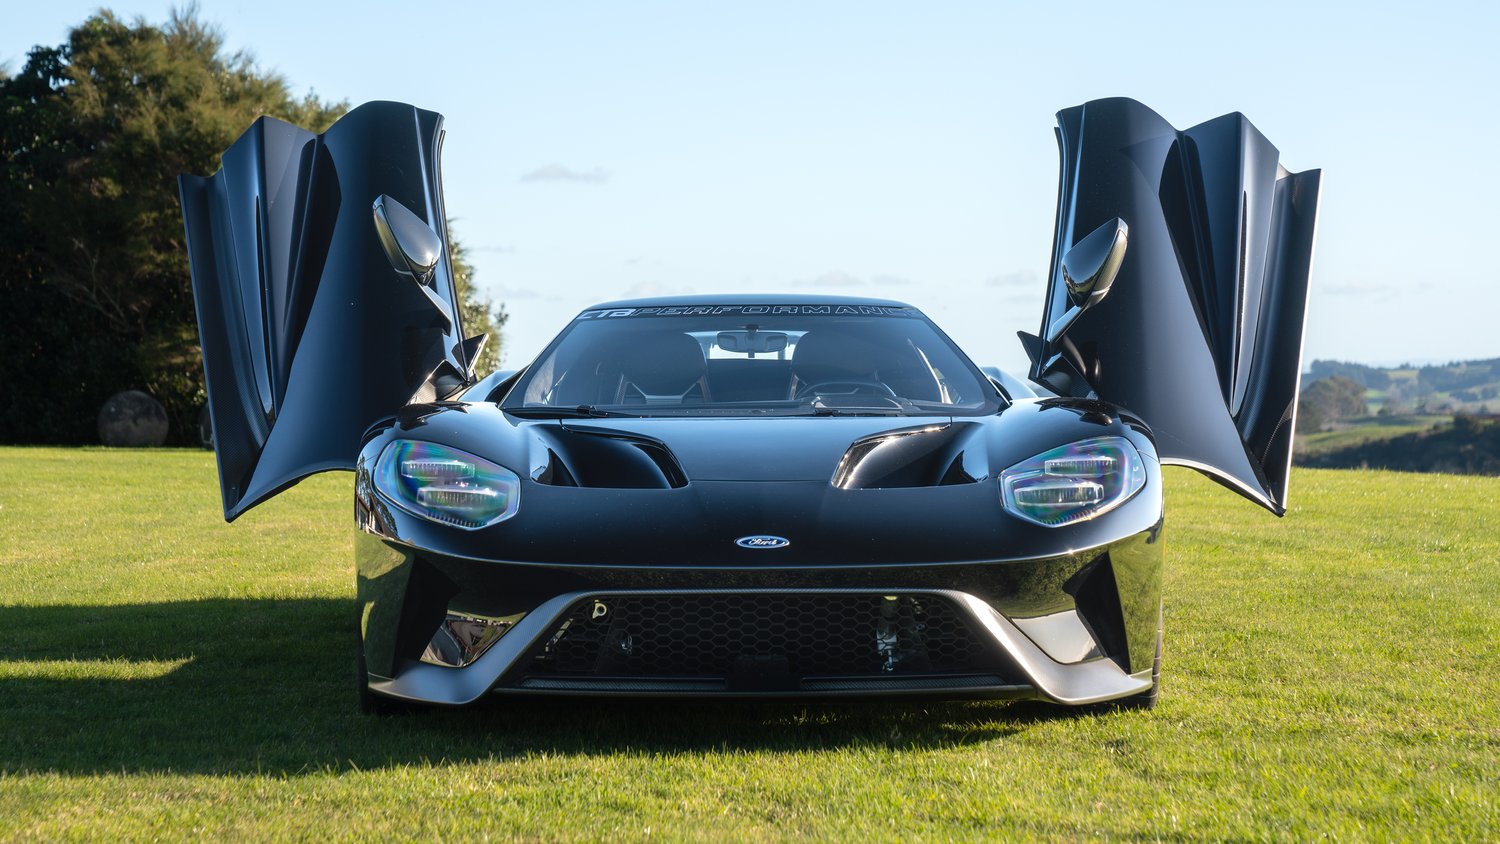 Gran Turismo 7 - 2018 Ford GT Race Car REVIEW 